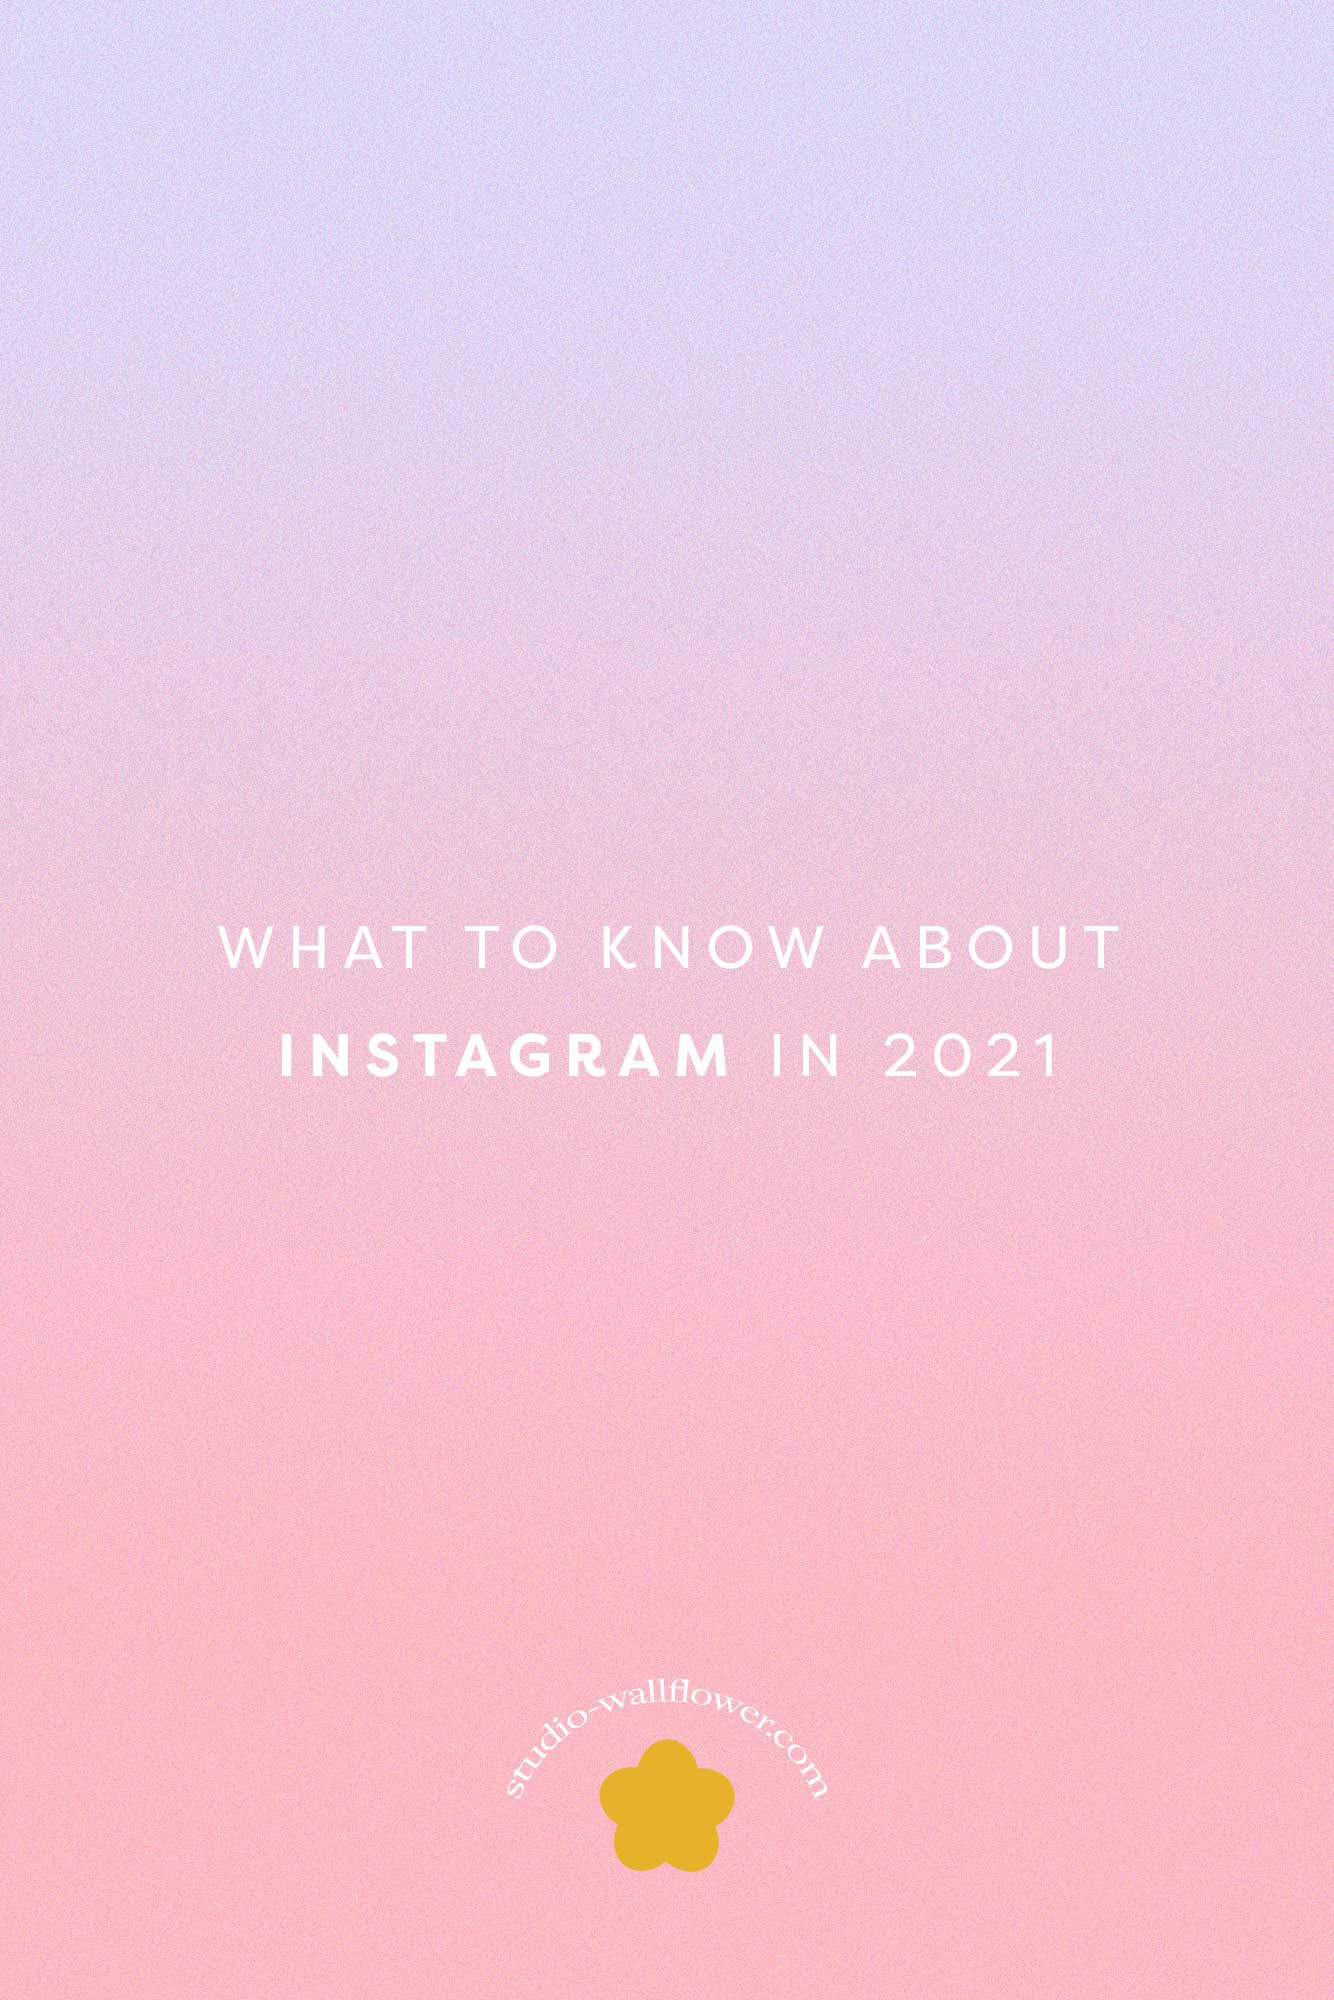 What To Know About Instagram In 2021 - via studio wallflower